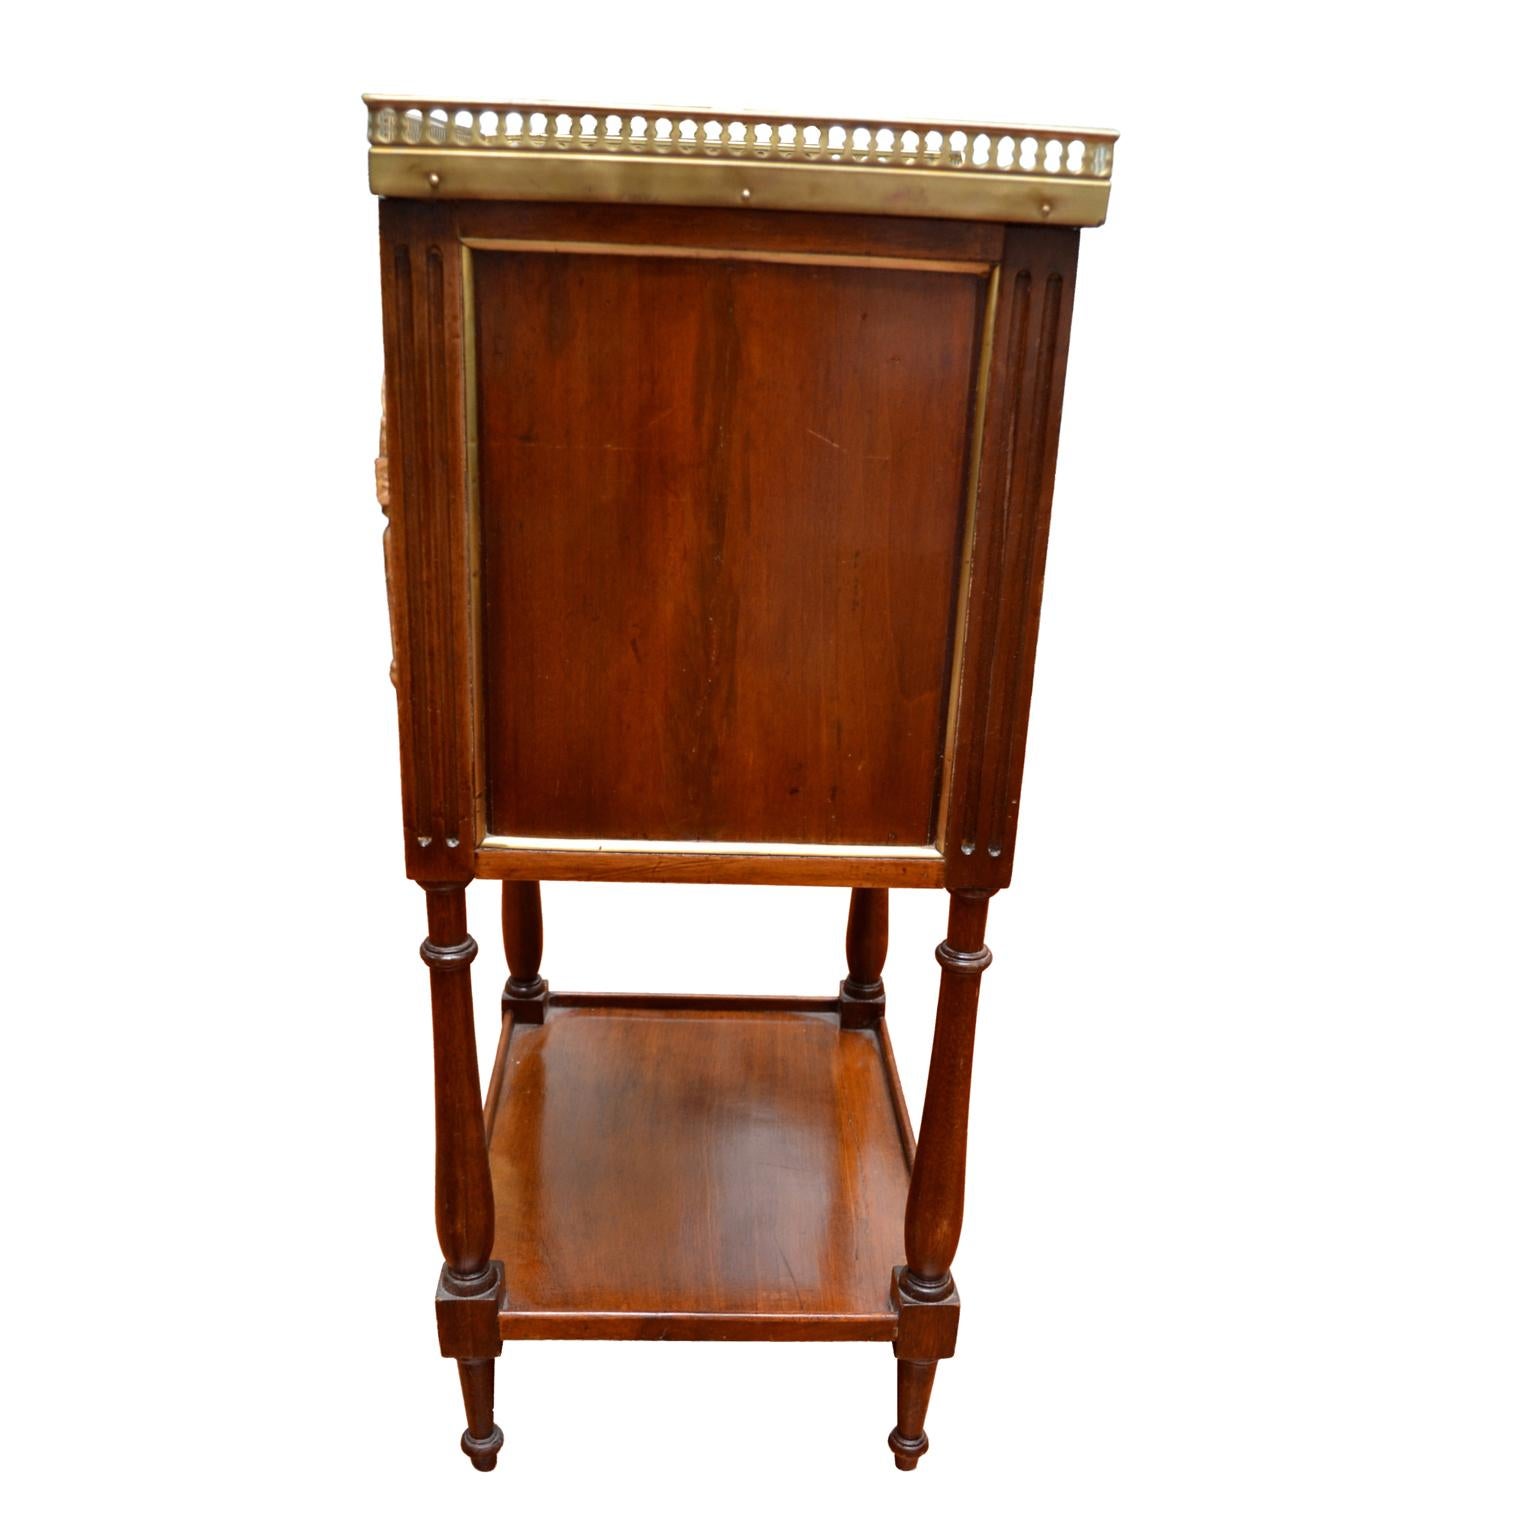 Hand-Crafted 18th Century Louis XVI Mahogany Night Table with a White Marble Top